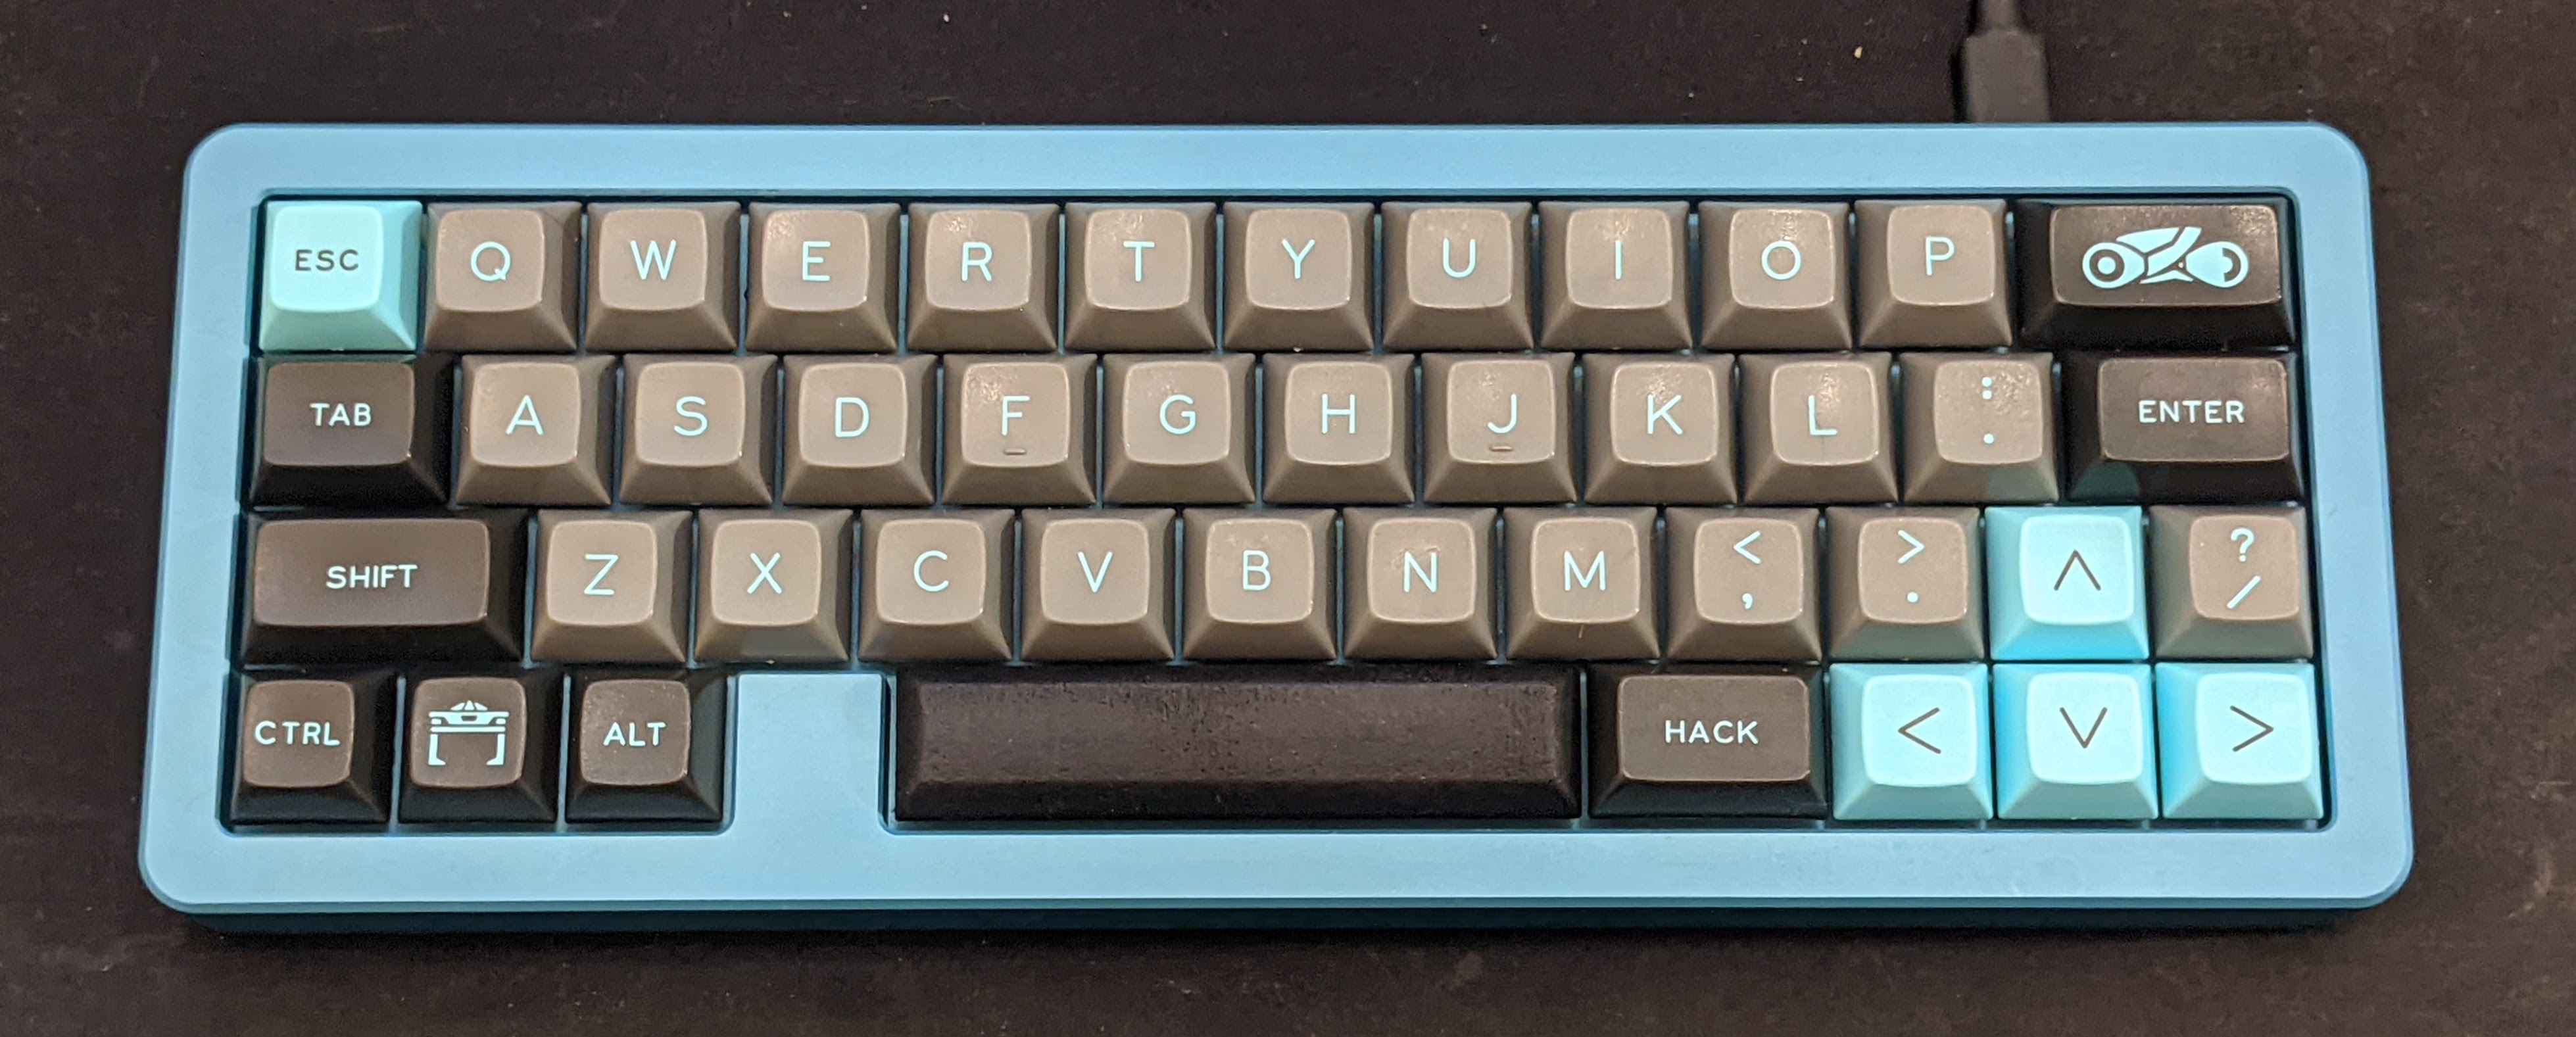 MHKB S-Type in Fabulous Teal with DSA LightCycle R1 and R2 keycaps and a 3D printed 4.25u HuB spacebar